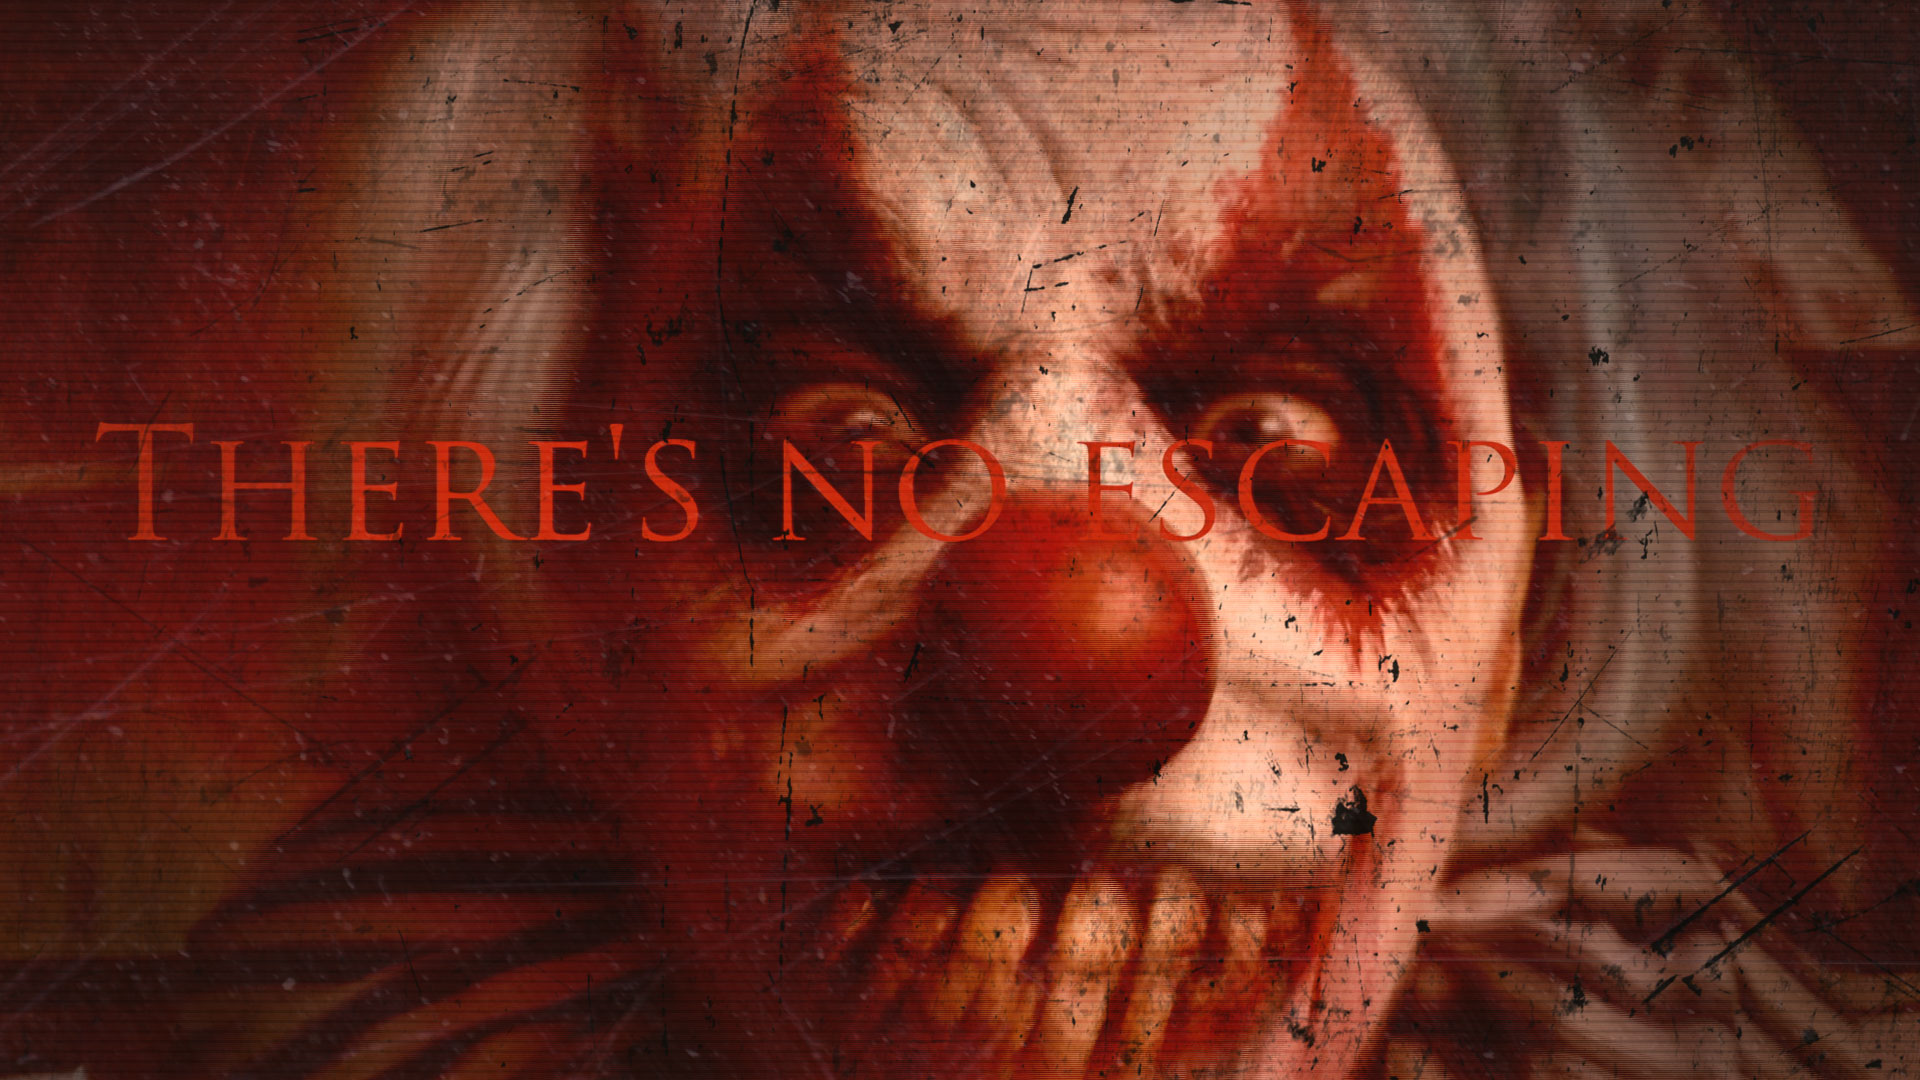 Mr Gacy is waiting for you…